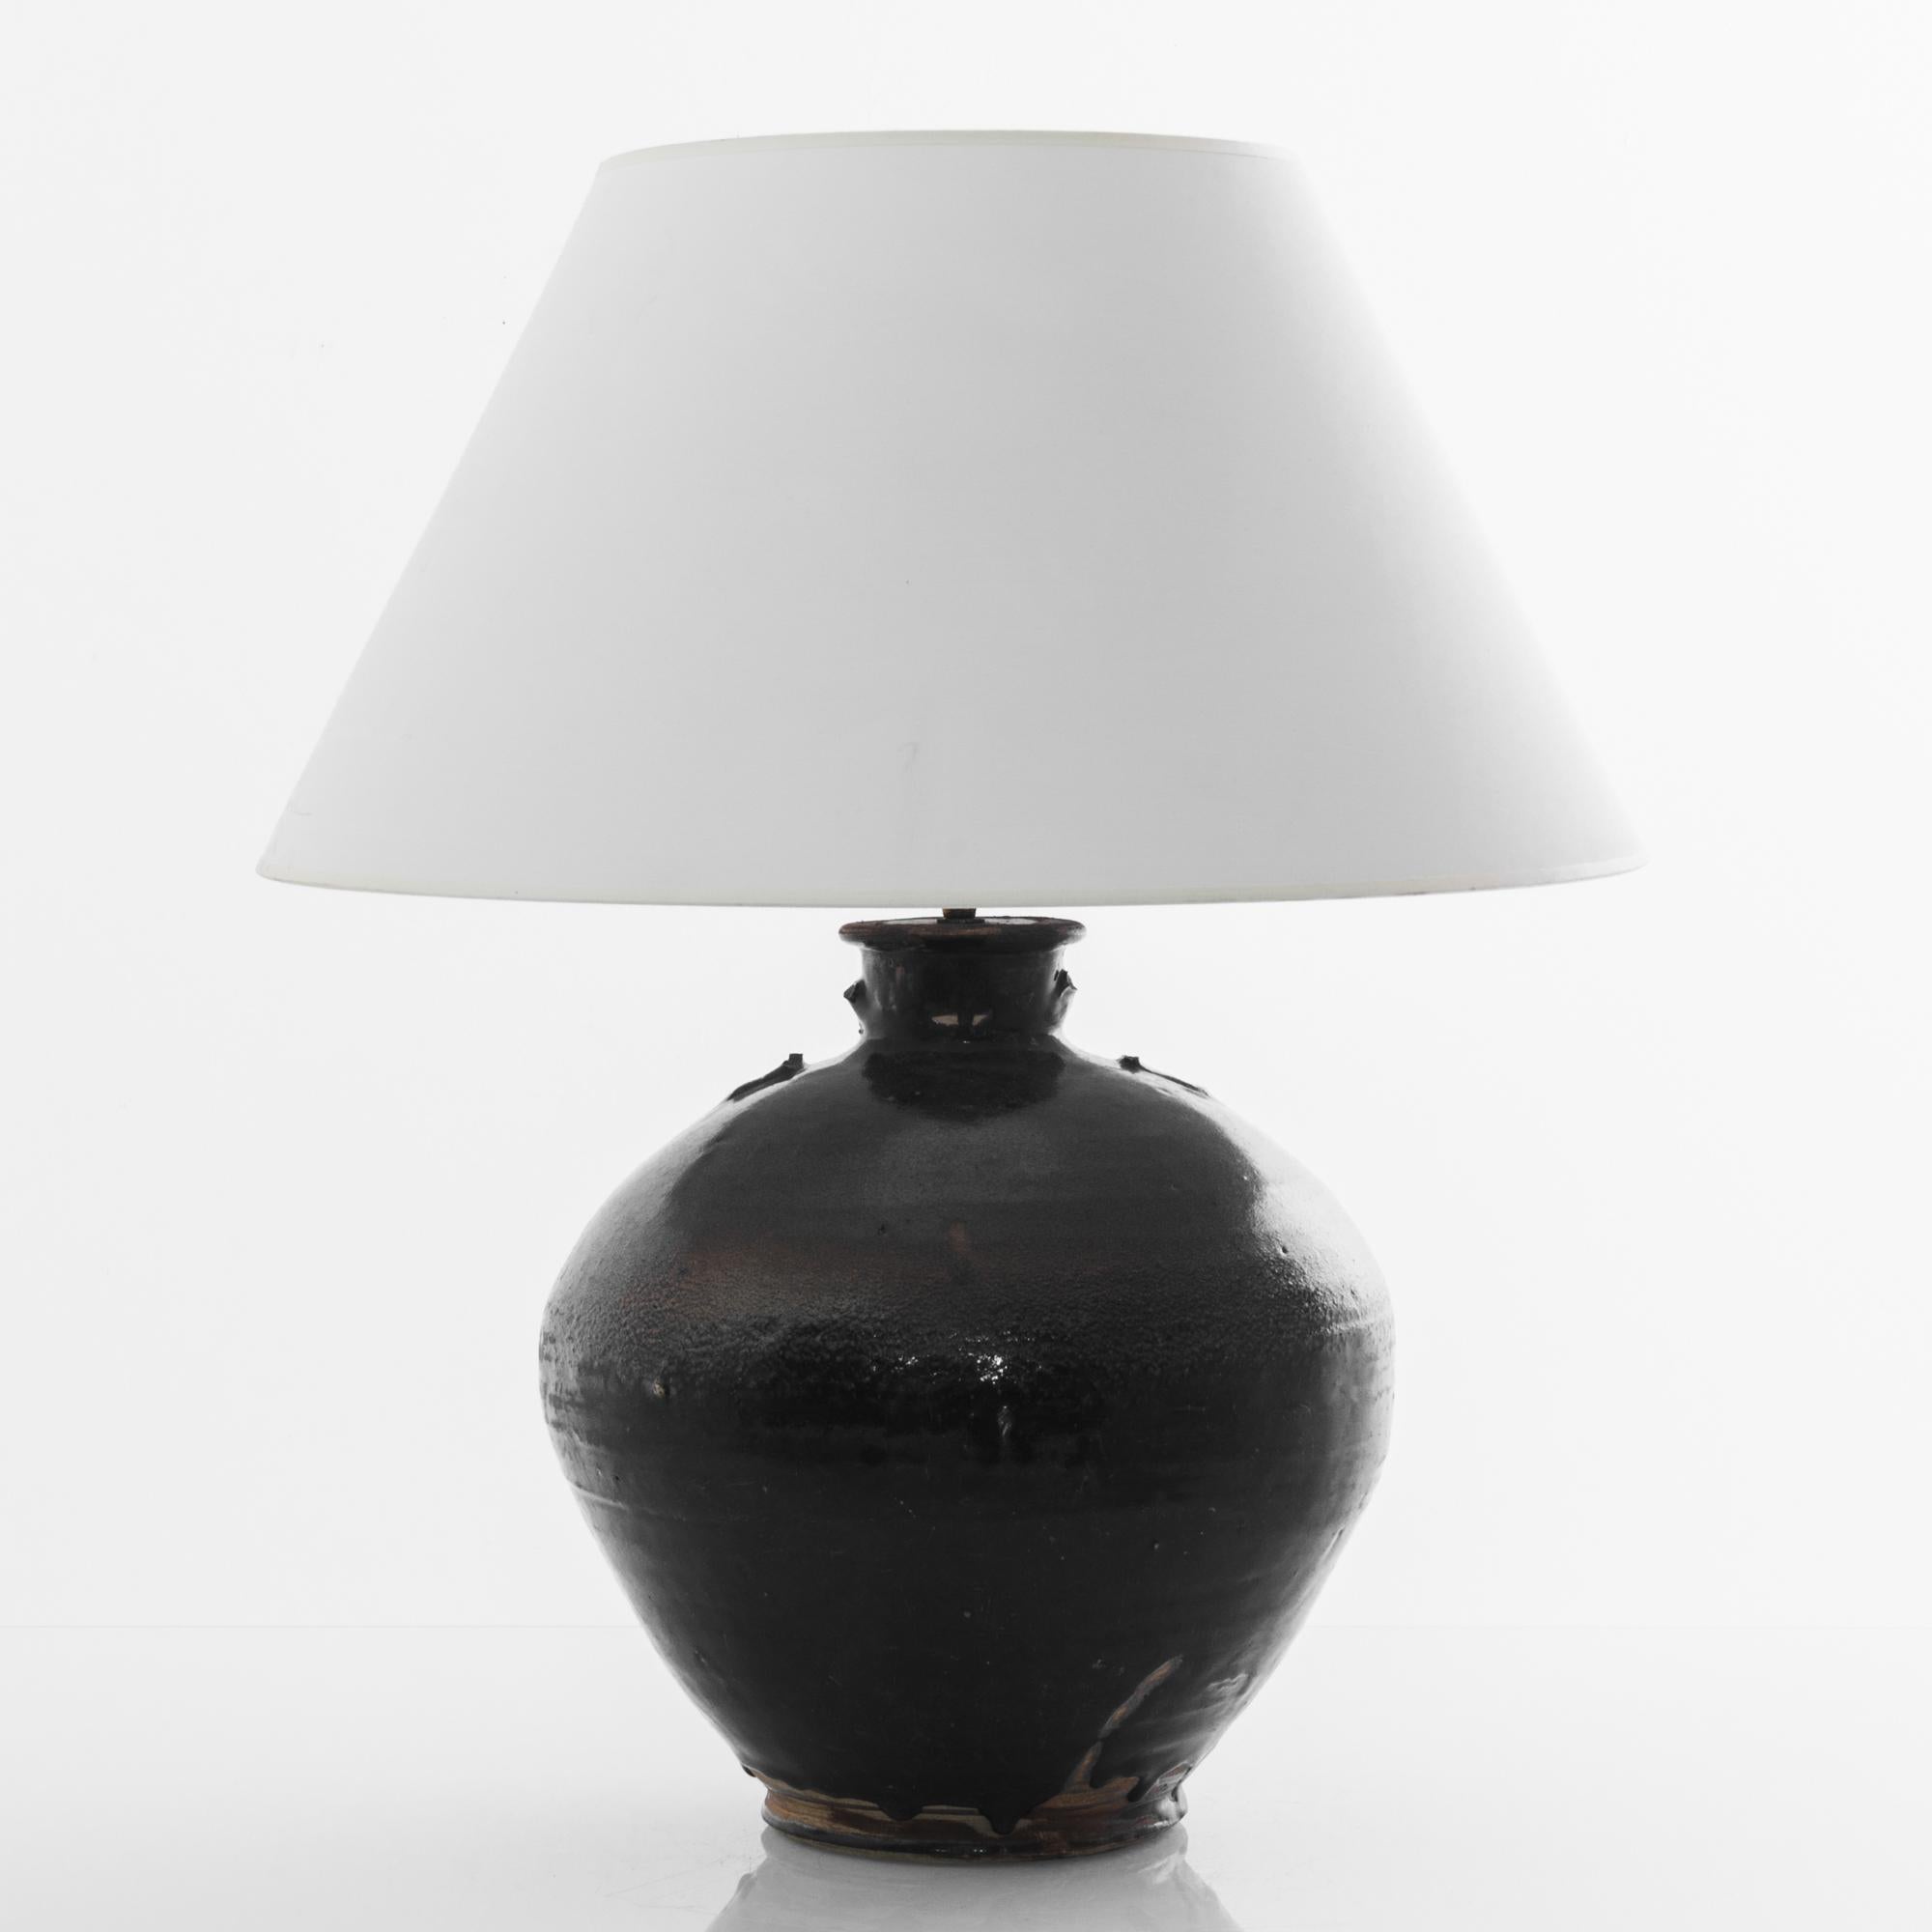 A vintage Chinese vase, fitted with an adjustable brass fixture and E26 lighting socket. The deep tone of the earthy black glaze creates a vivid visual impact. Textured glazes, attractive colors and curving shape grants a sensuous tactility to the